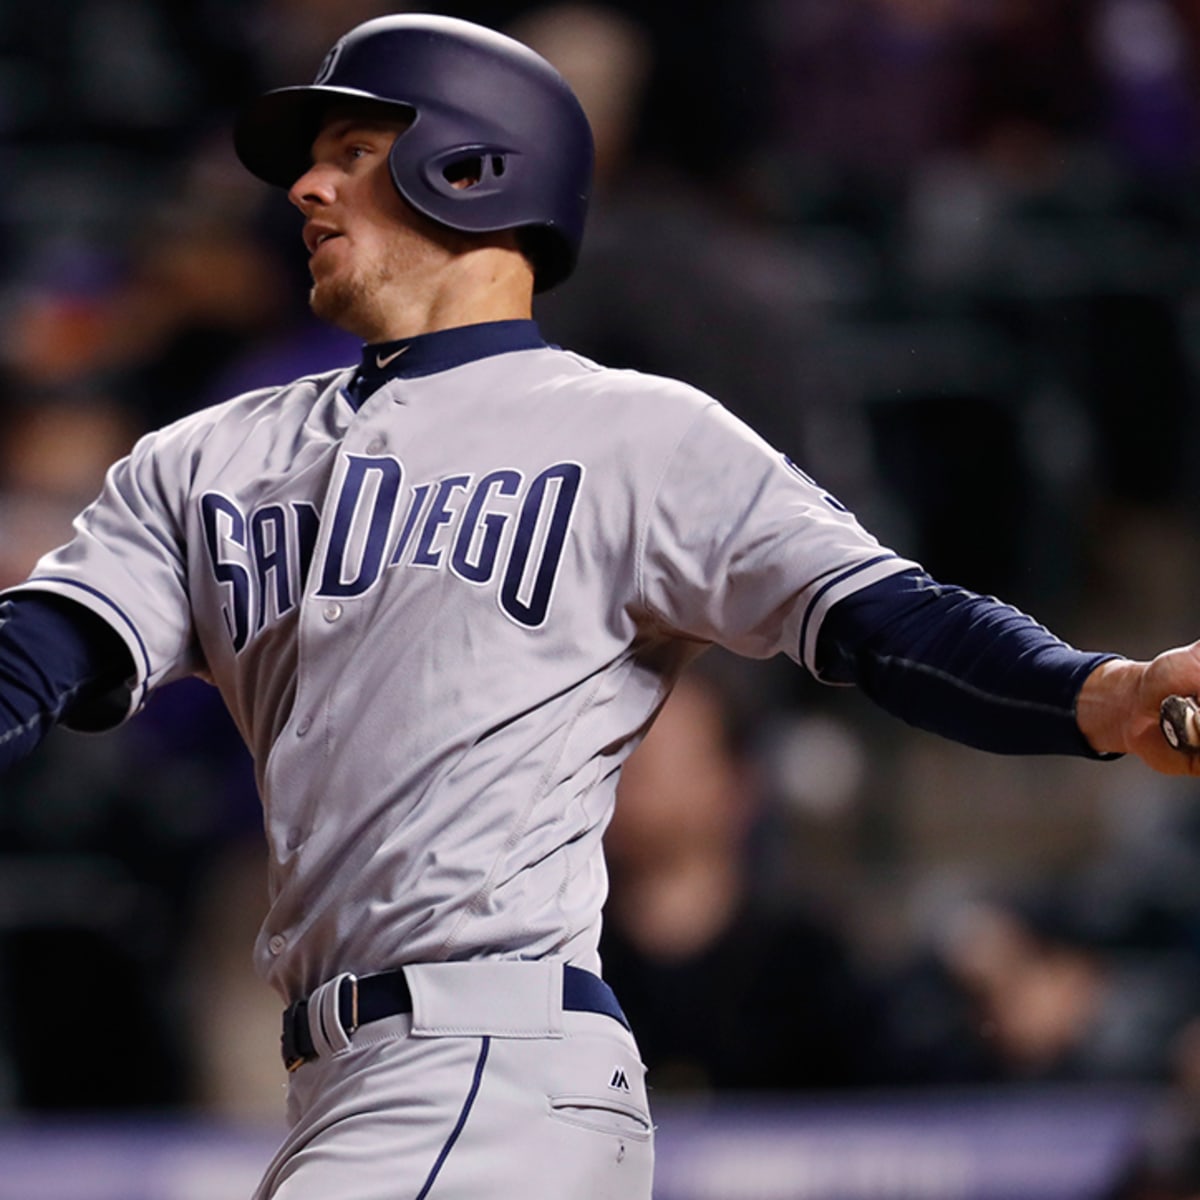 San Diego Padres News: Wil Myers' stats nothing to look into